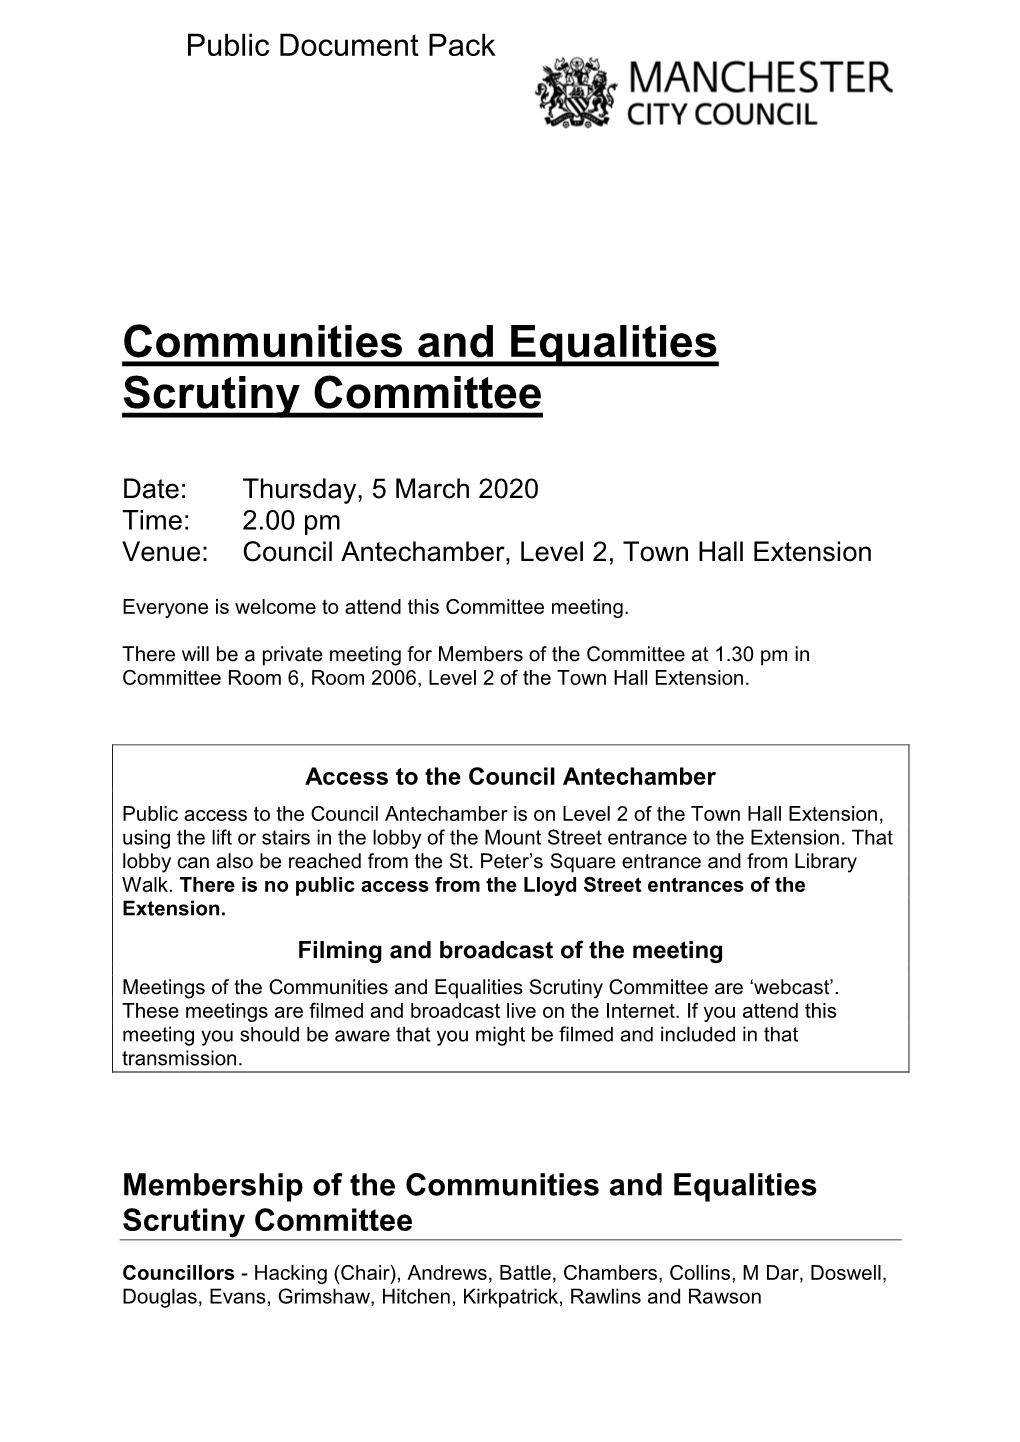 (Public Pack)Agenda Document for Communities and Equalities